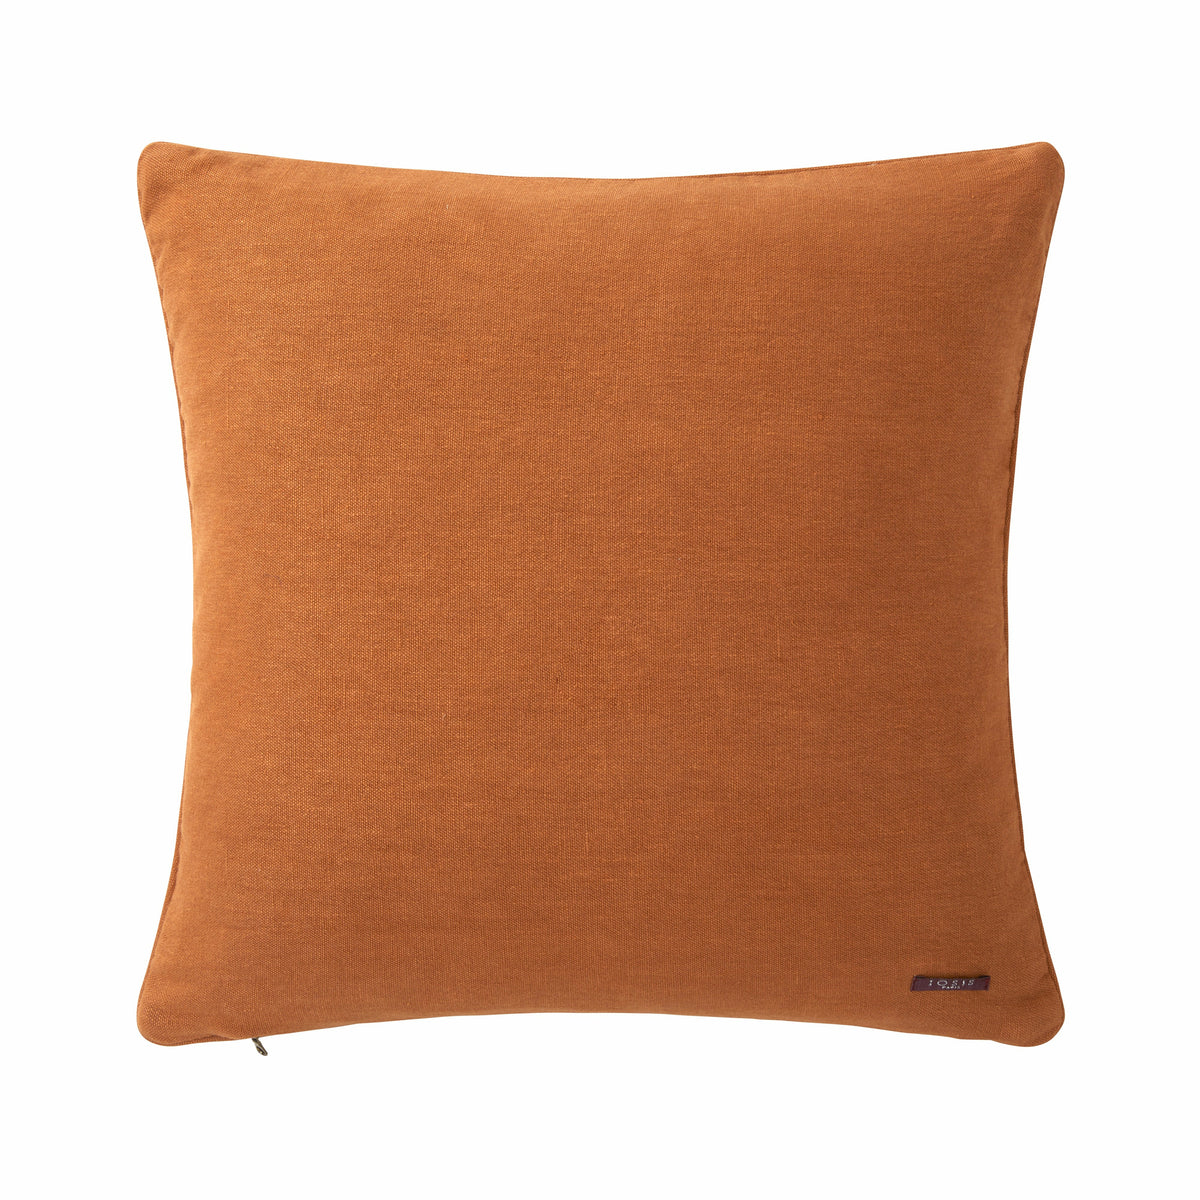 Yves Delorme Oniric Decorative Pillows 22x22 Back Nuit